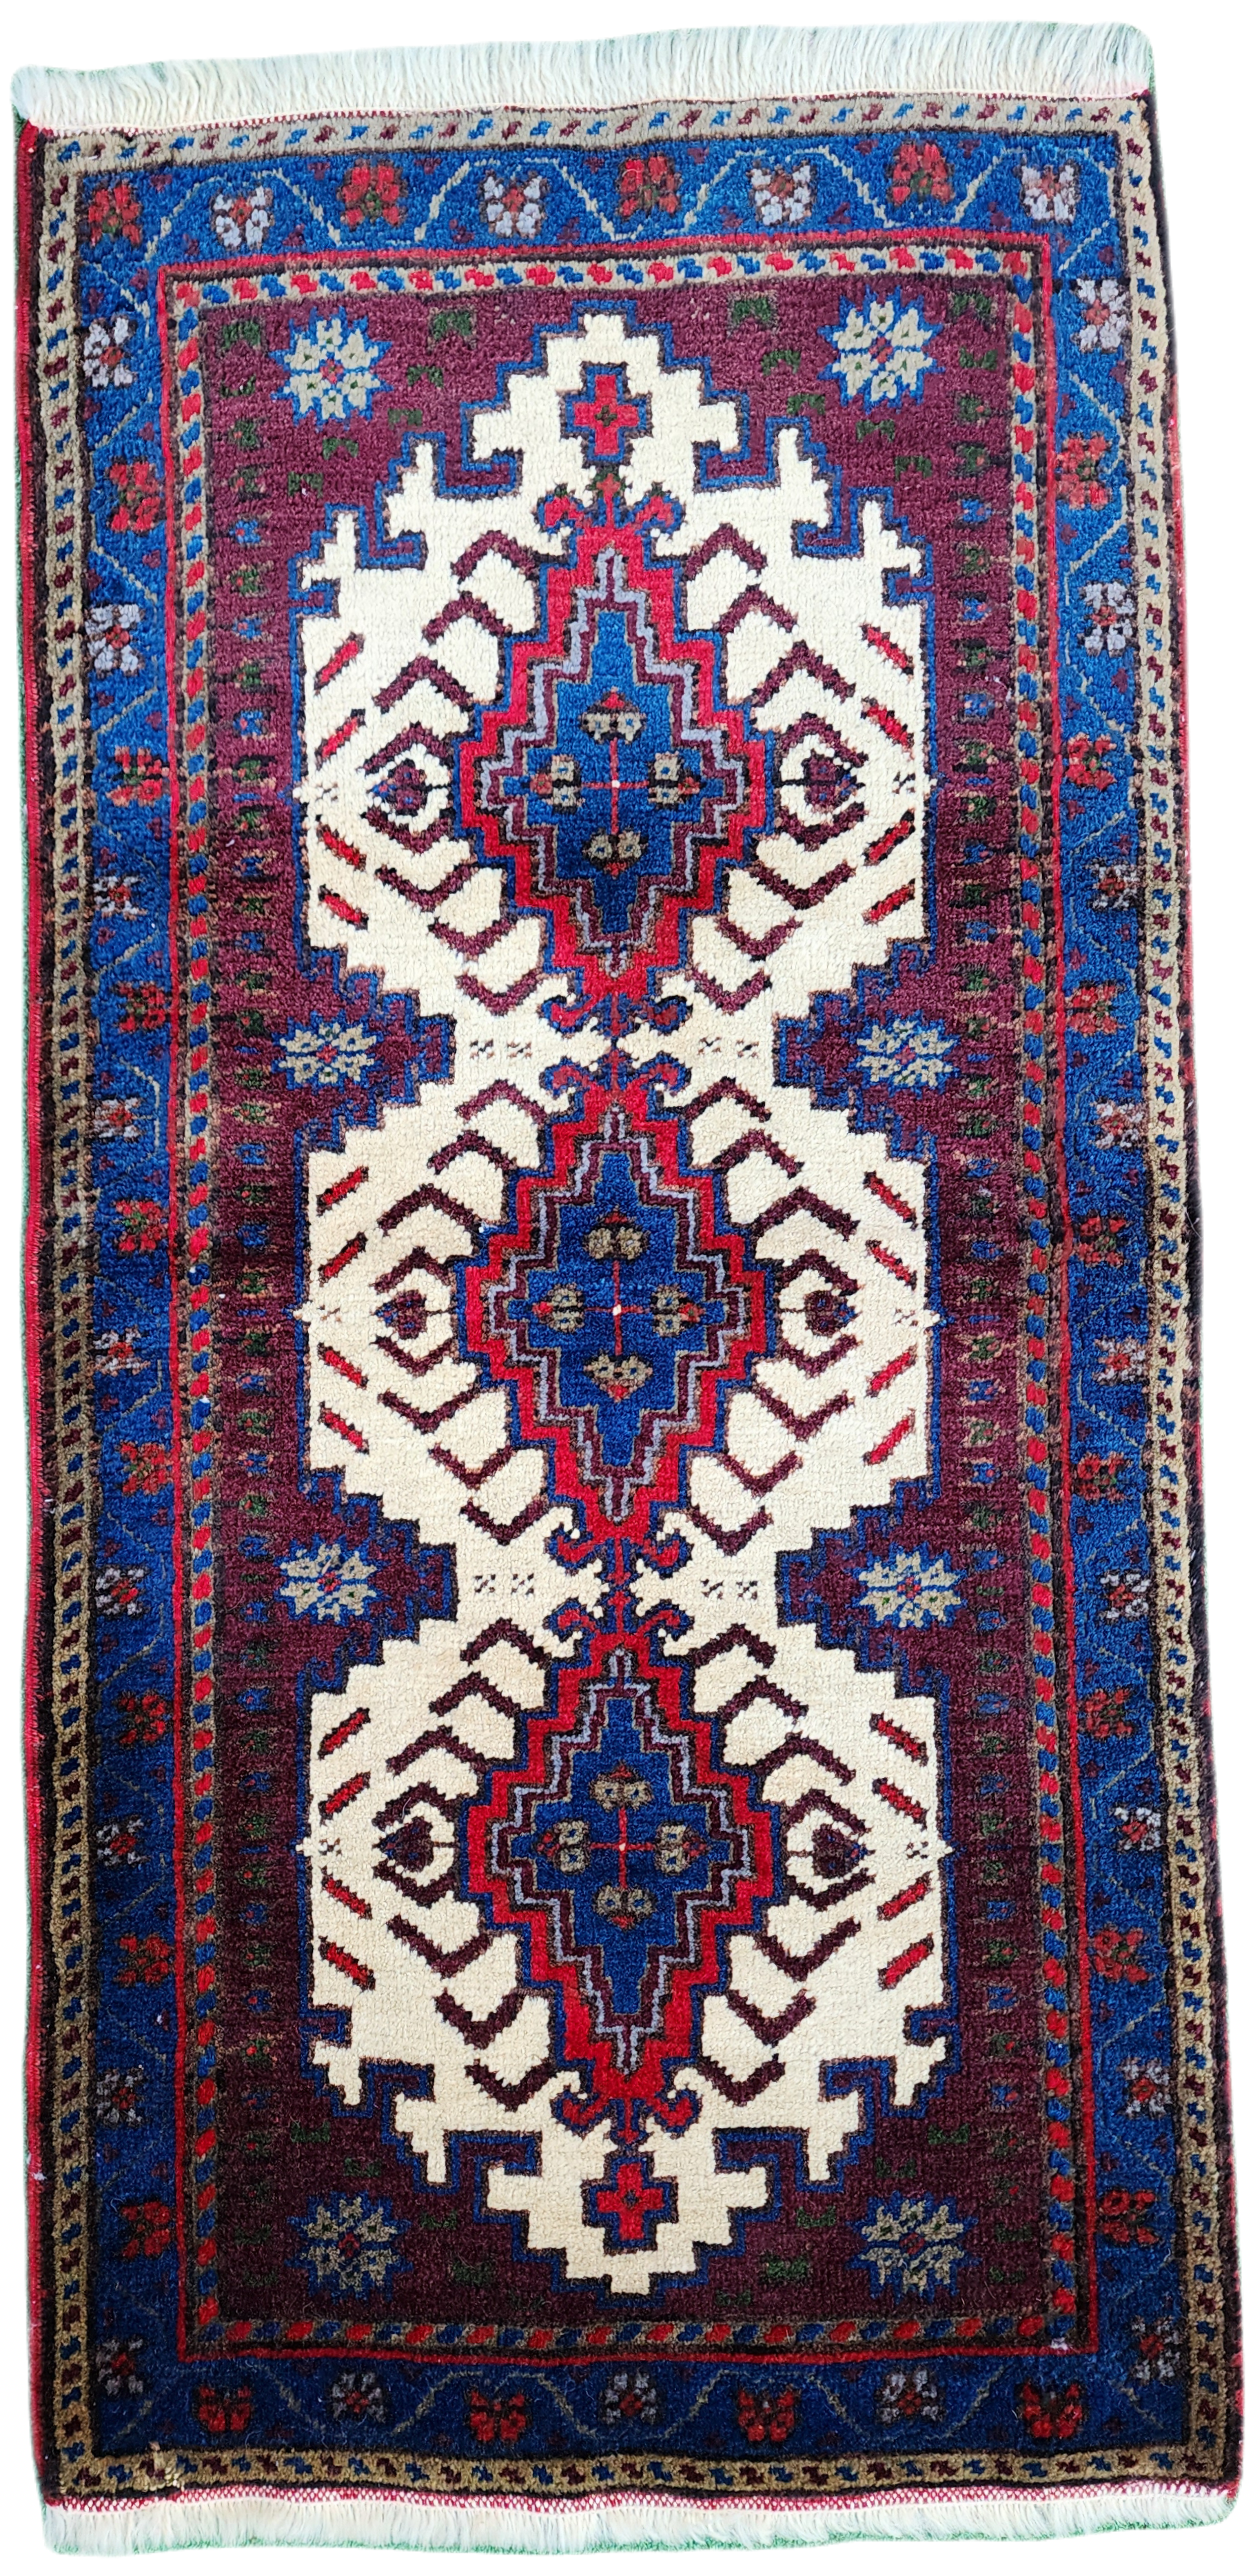 Red Blue Small Turkish Rug, 3 ft 4 in x 1 ft 7 in, Vintage Rug for Entry, Kitchen, Hallway or Bedroom Persian Oriental Boho Rustic Decor